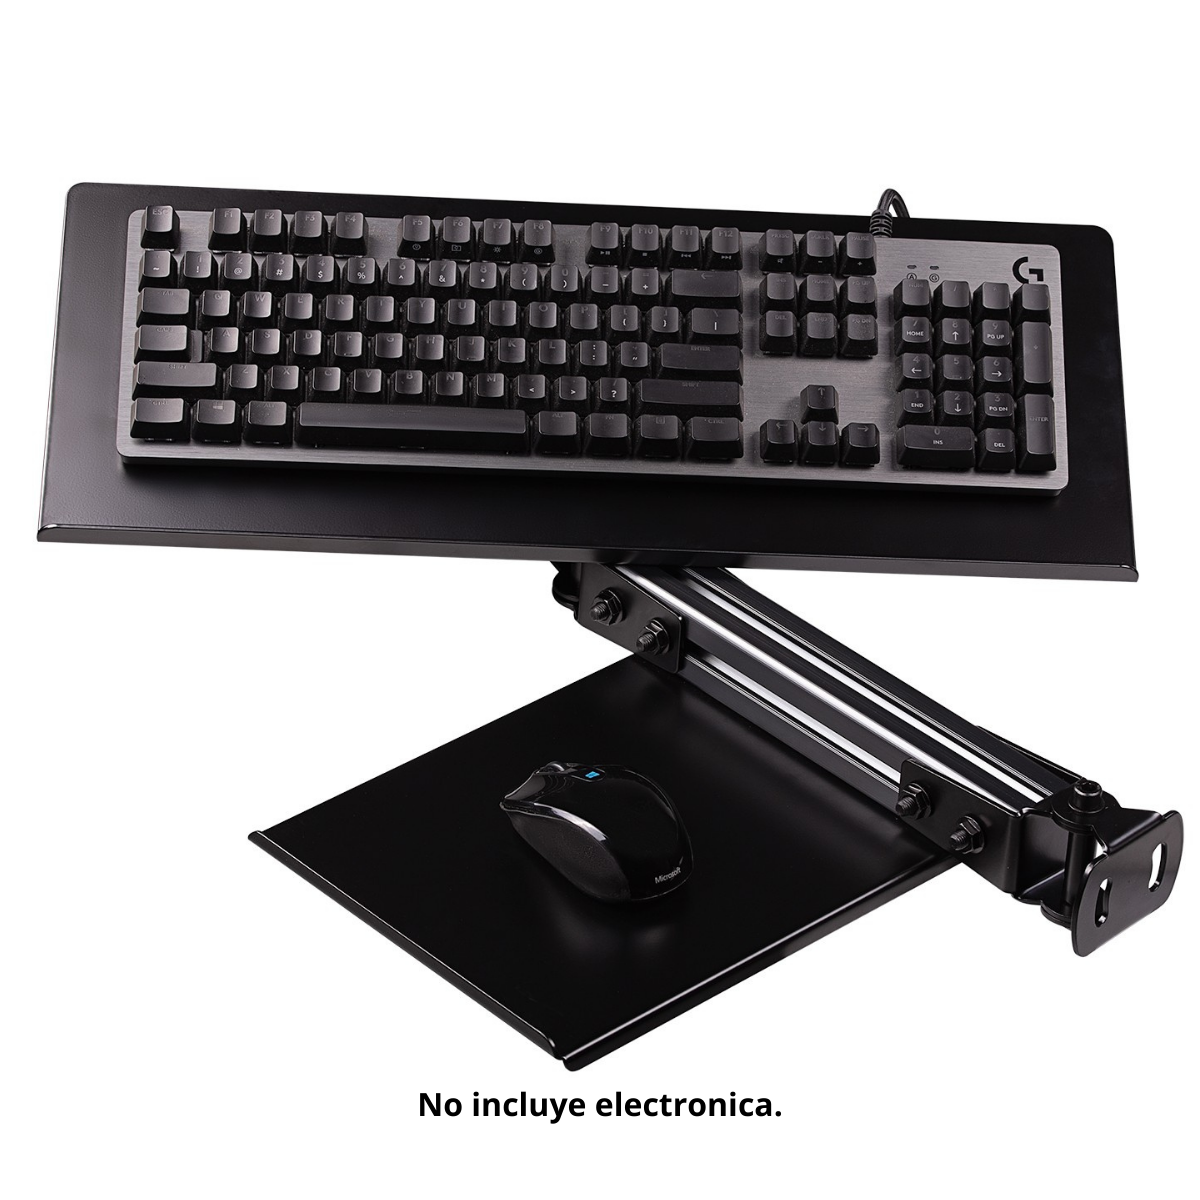 NLR-E010 ELITE MOUSE NEXT KEYBOARD RACING & TRAY LEVEL